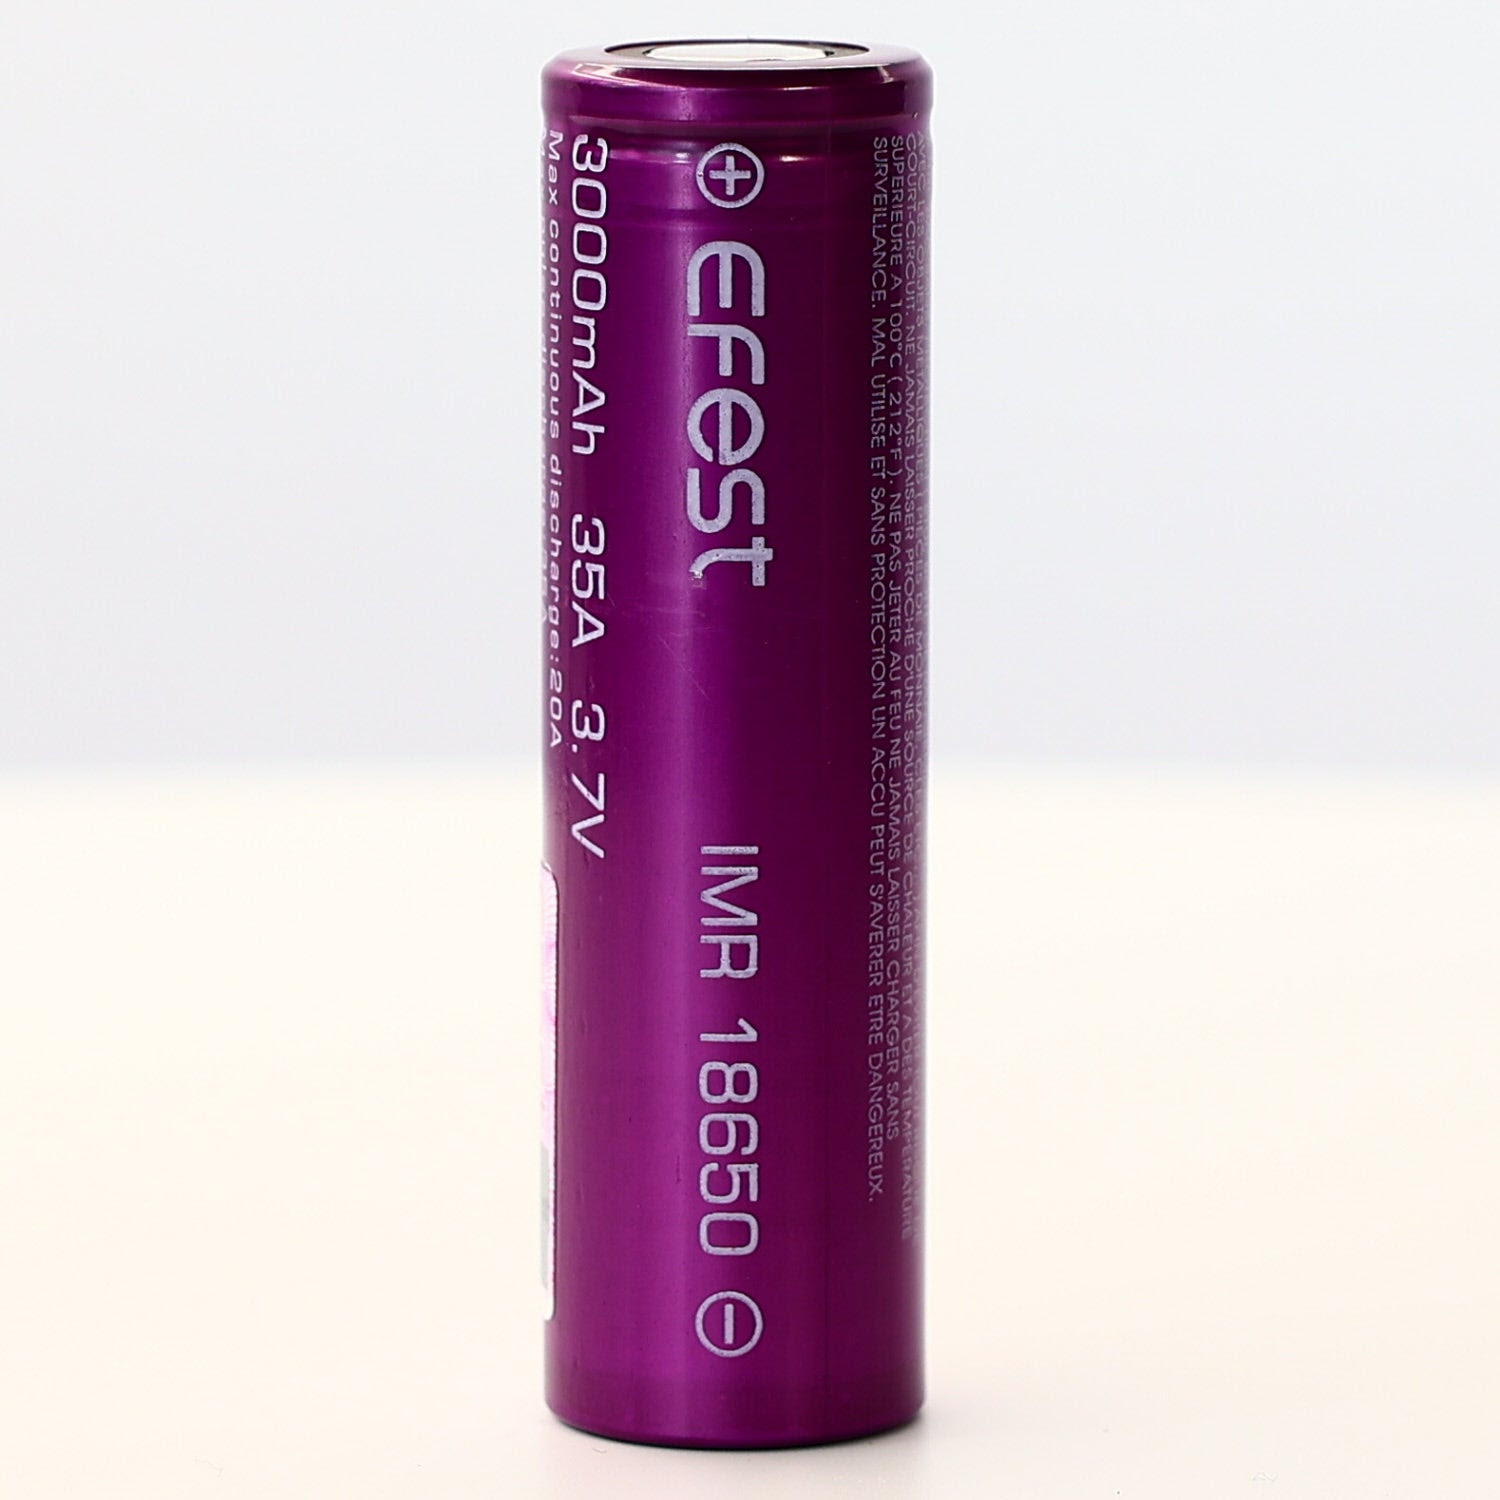 Image of Efest 18650 3000mAh 20A IMR Battery